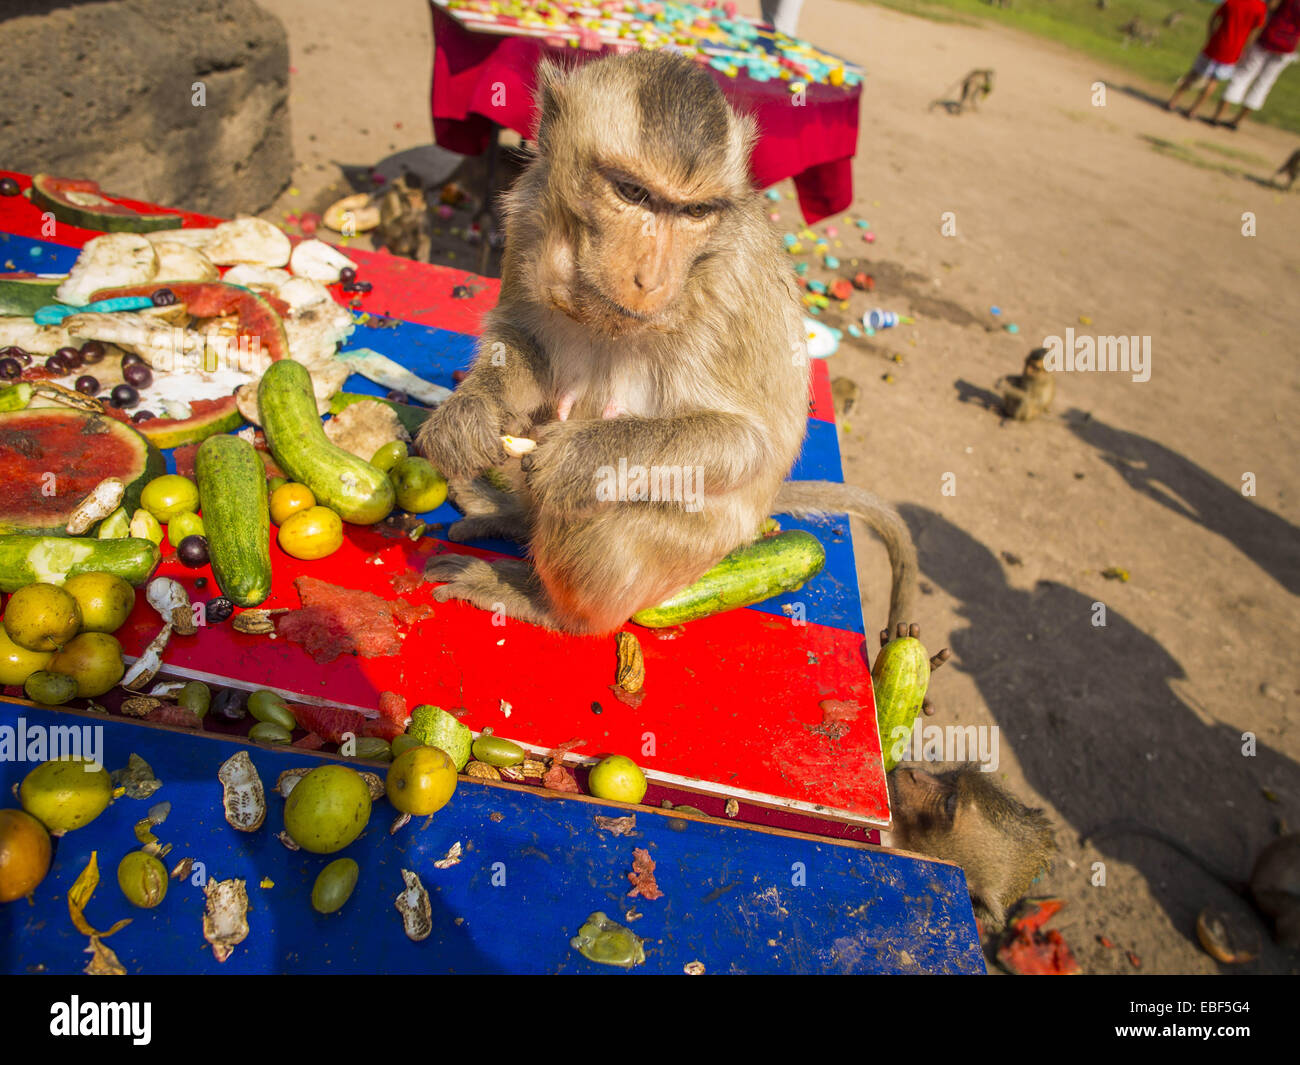 Lopburi, Lopburi, Thailand. 30th Nov, 2014. Long tailed macaque monkeys eat the fruit and vegetable buffet at the annual monkey buffet party in Lopburi, Thailand. Lopburi is the capital of Lopburi province and is about 180 kilometers from Bangkok. Lopburi is home to thousands of Long Tailed Macaque monkeys. A regular sized adult is 38 to 55cm long and its tail is typically 40 to 65cm. Male macaques weigh around 5 to 9 kilos, females weigh approximately 3 to 6 kg. The Monkey Buffet was started in the 1980s by a local business man who owned a hotel and wanted to attract visitors to the provinci Stock Photo